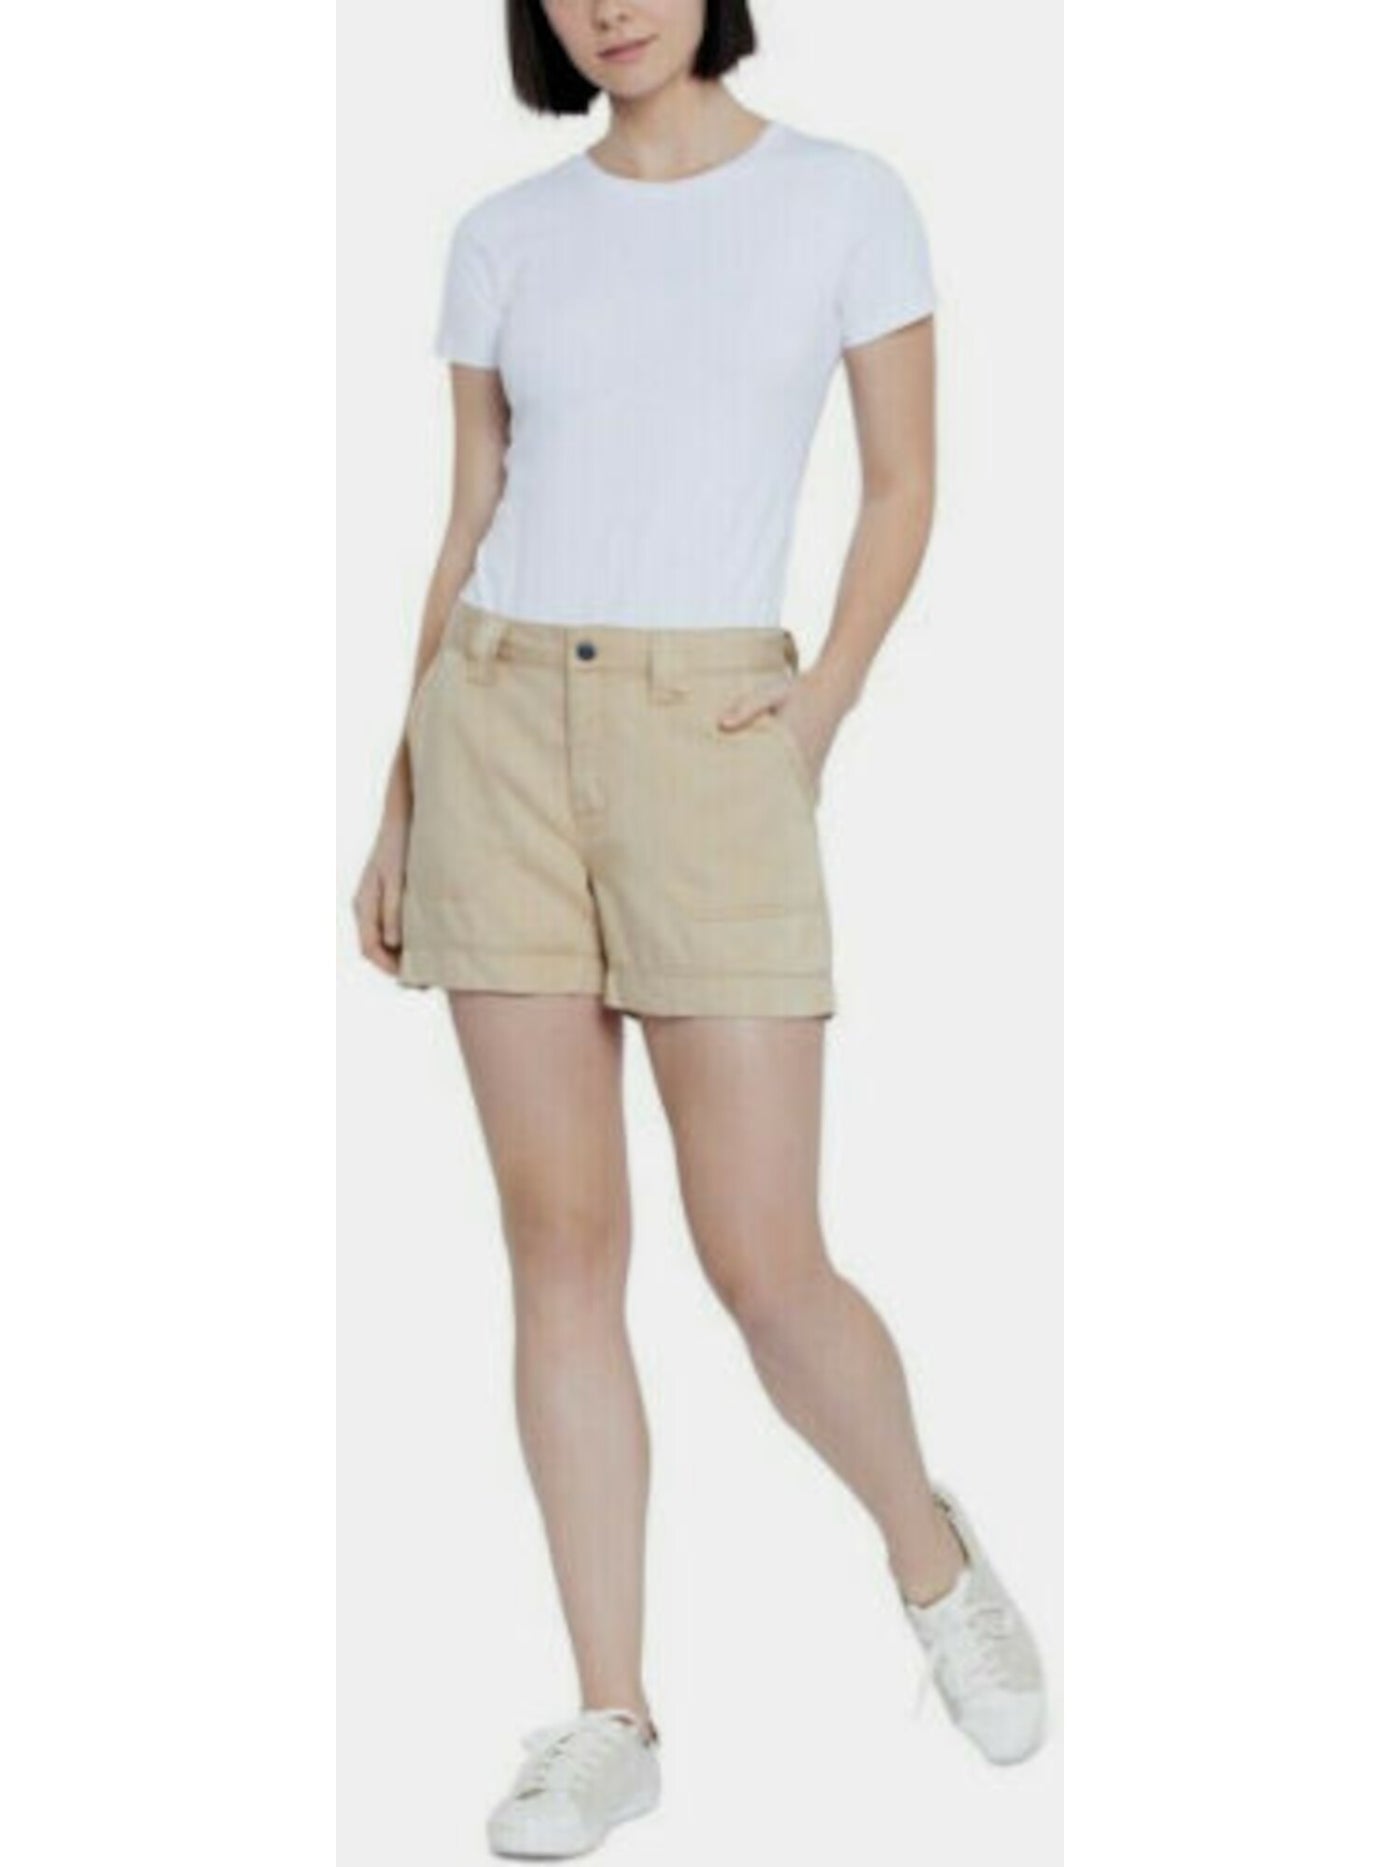 SEVEN7 Womens Beige Stretch Zippered Pocketed Utility Shorts Juniors 6